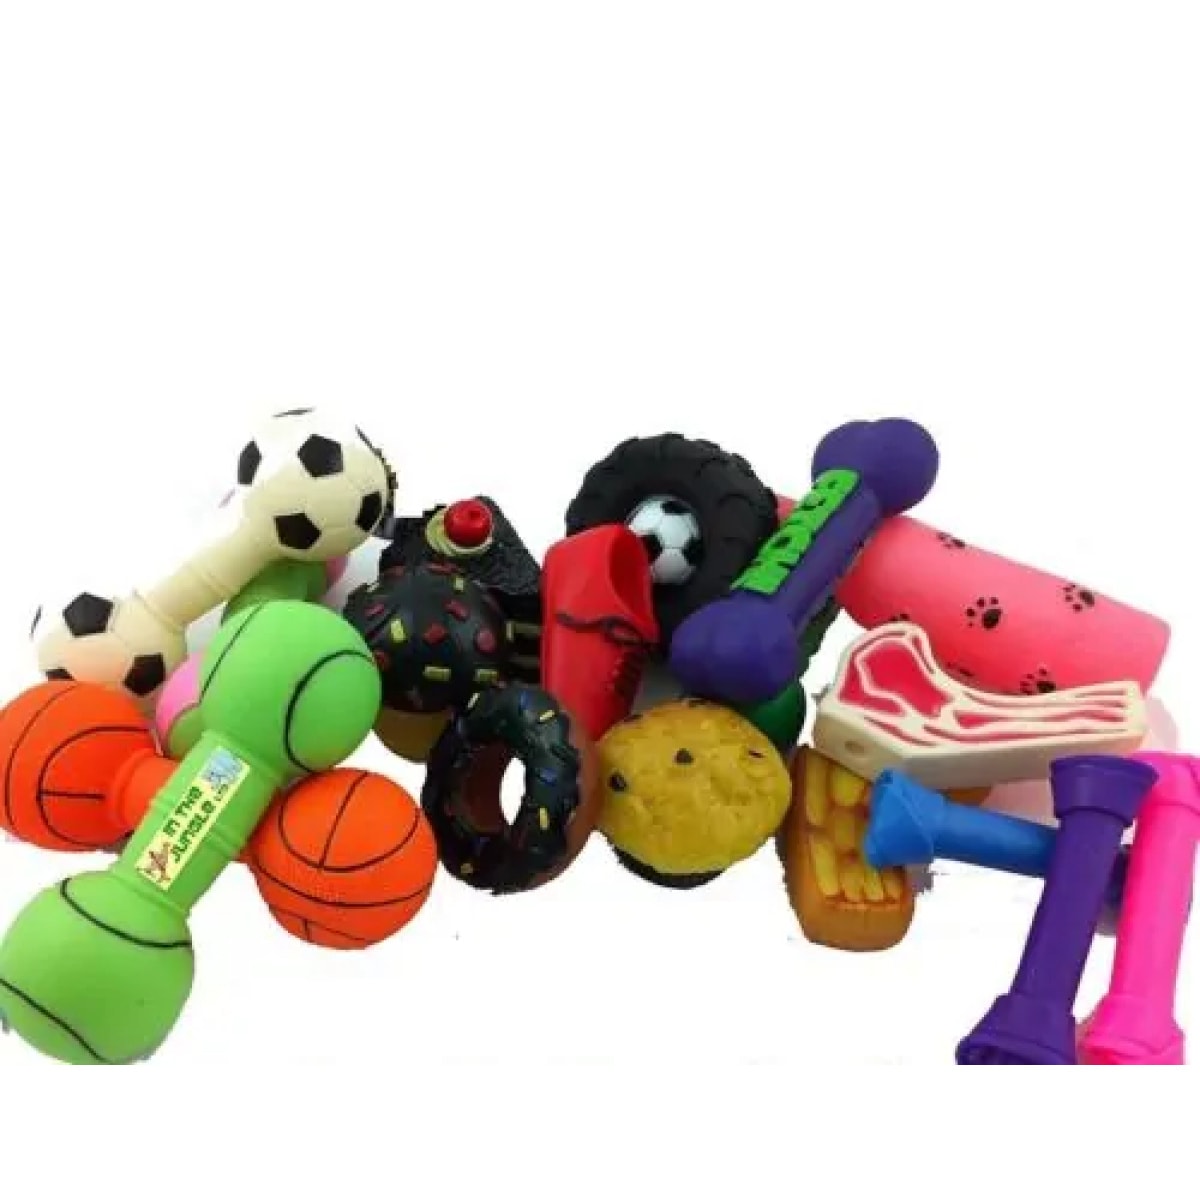 Assorted Squeaky Toys - Large Main Image